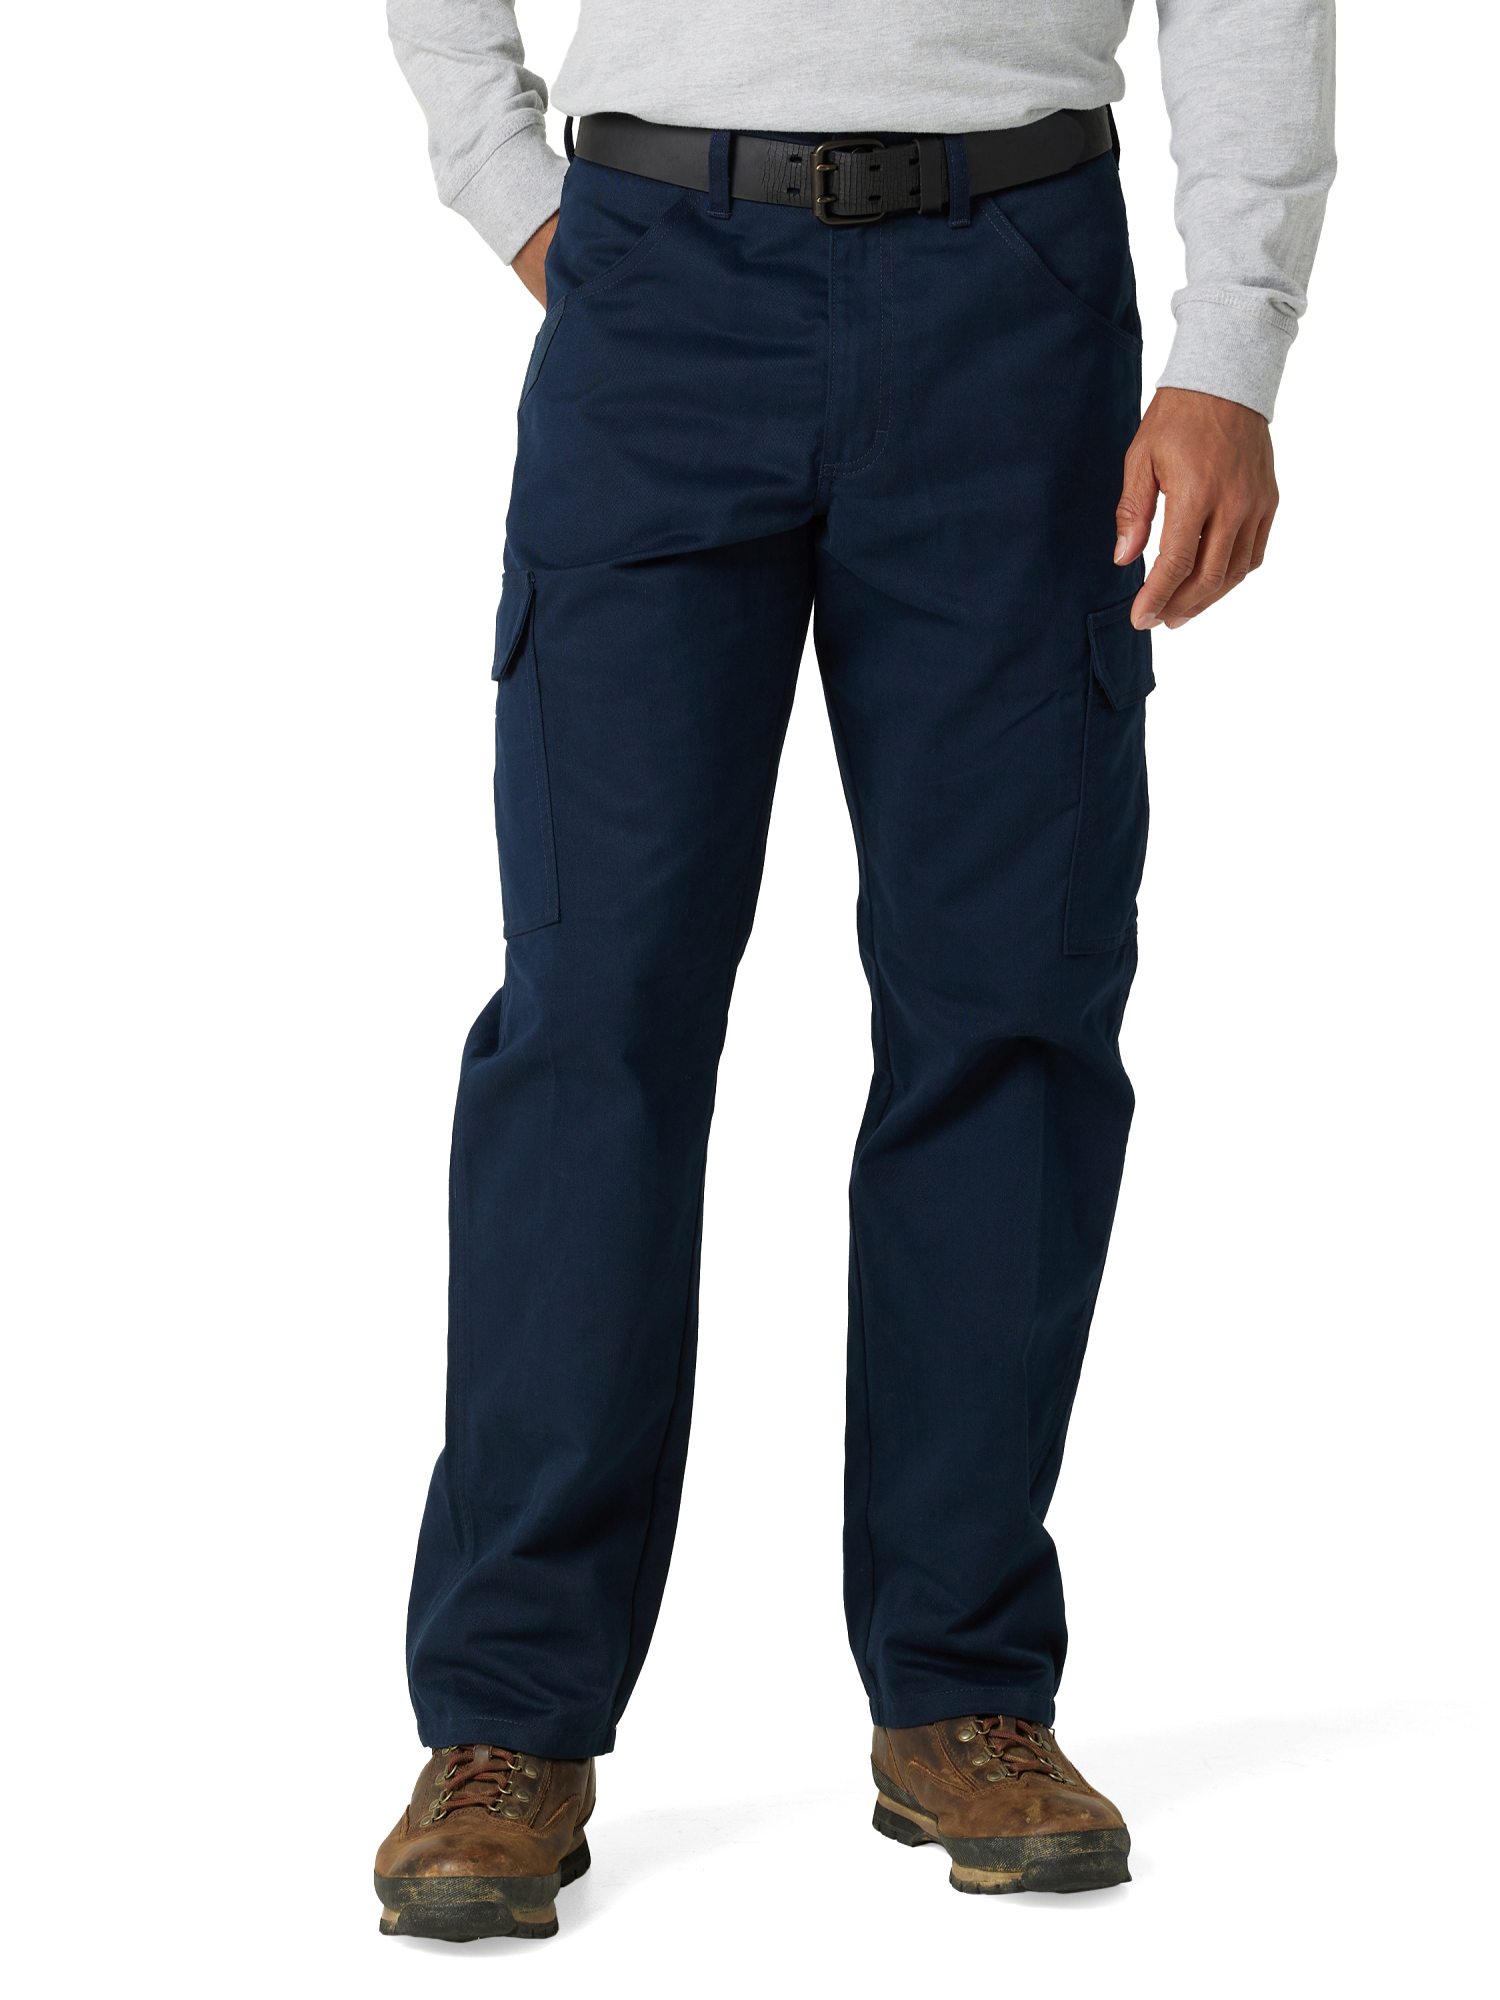 Snickers Mens Cooltwill Workwear Pants / Pants - Walmart.com